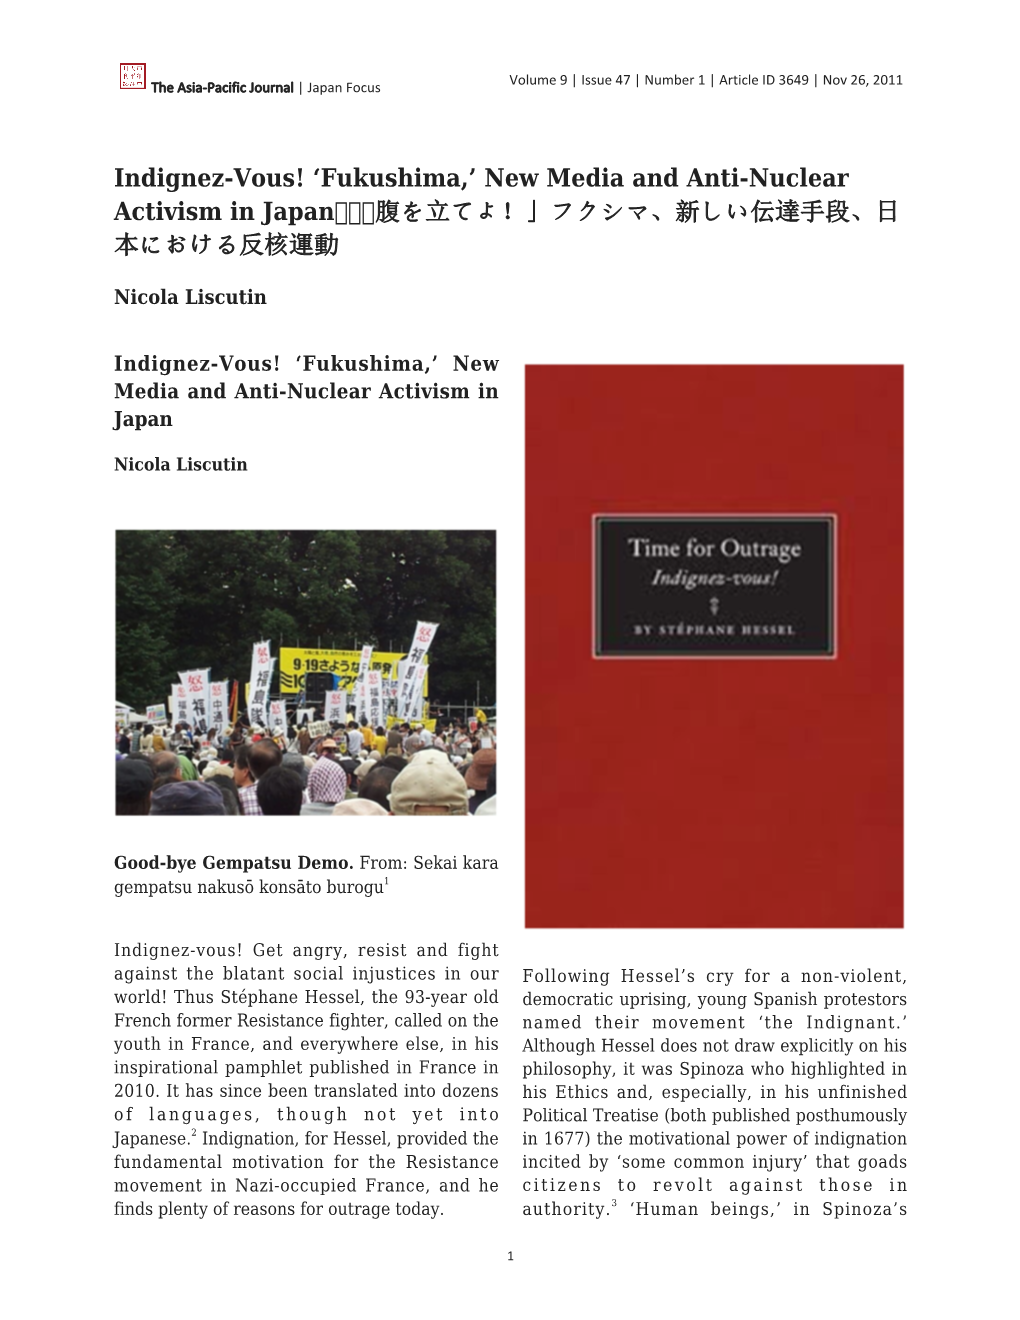 Indignez-Vous! 'Fukushima,' New Media and Anti-Nuclear Activism In